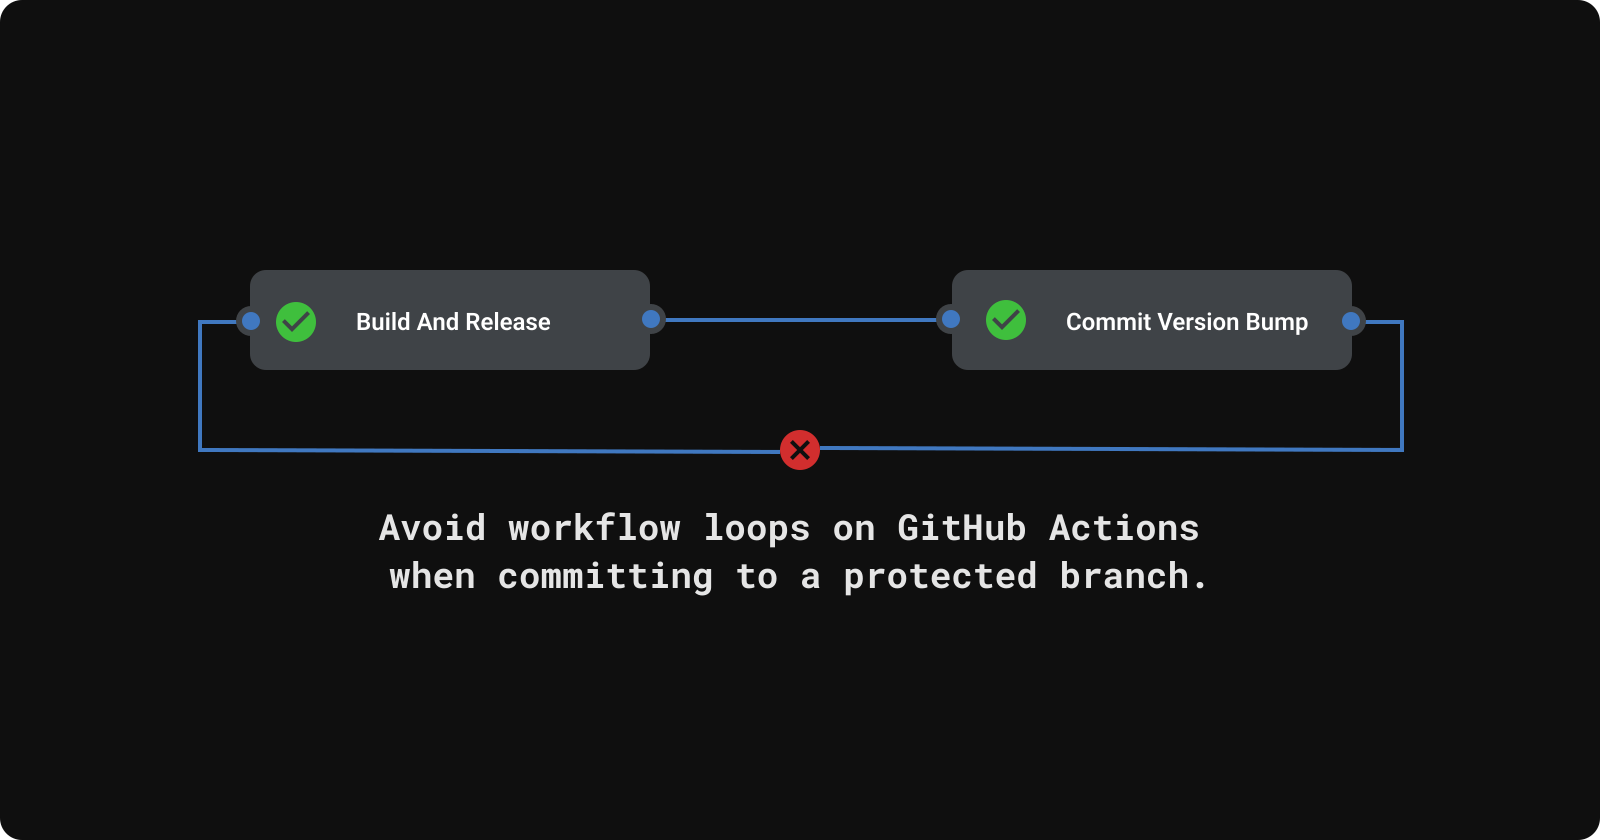 Avoid workflow loops on GitHub Actions when committing to a protected branch.